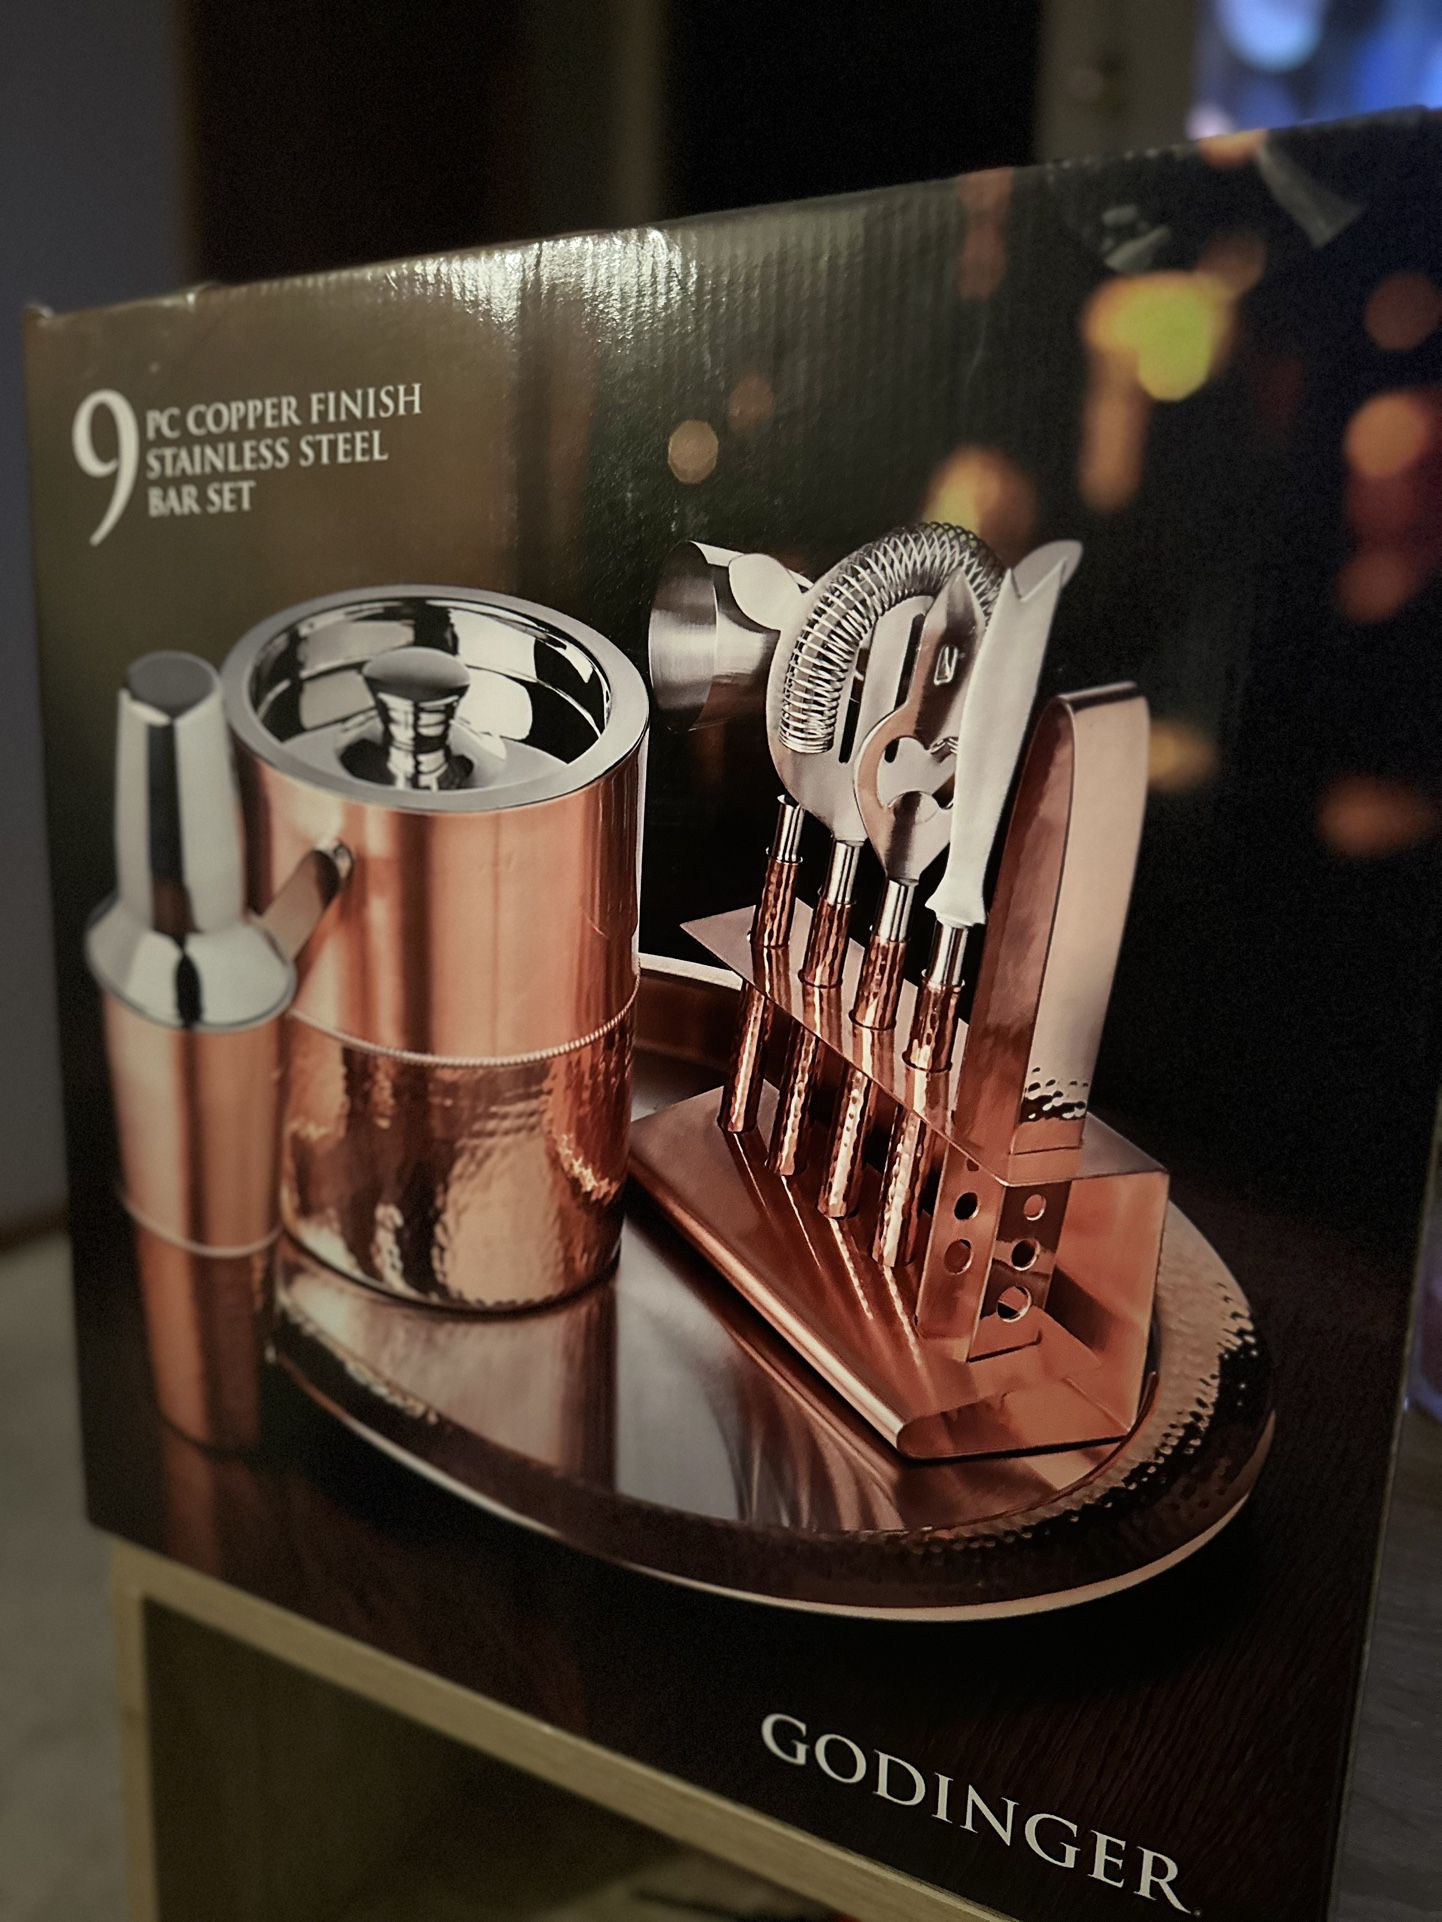 9 Piece Copper Finish Stainless Steel Bar Set